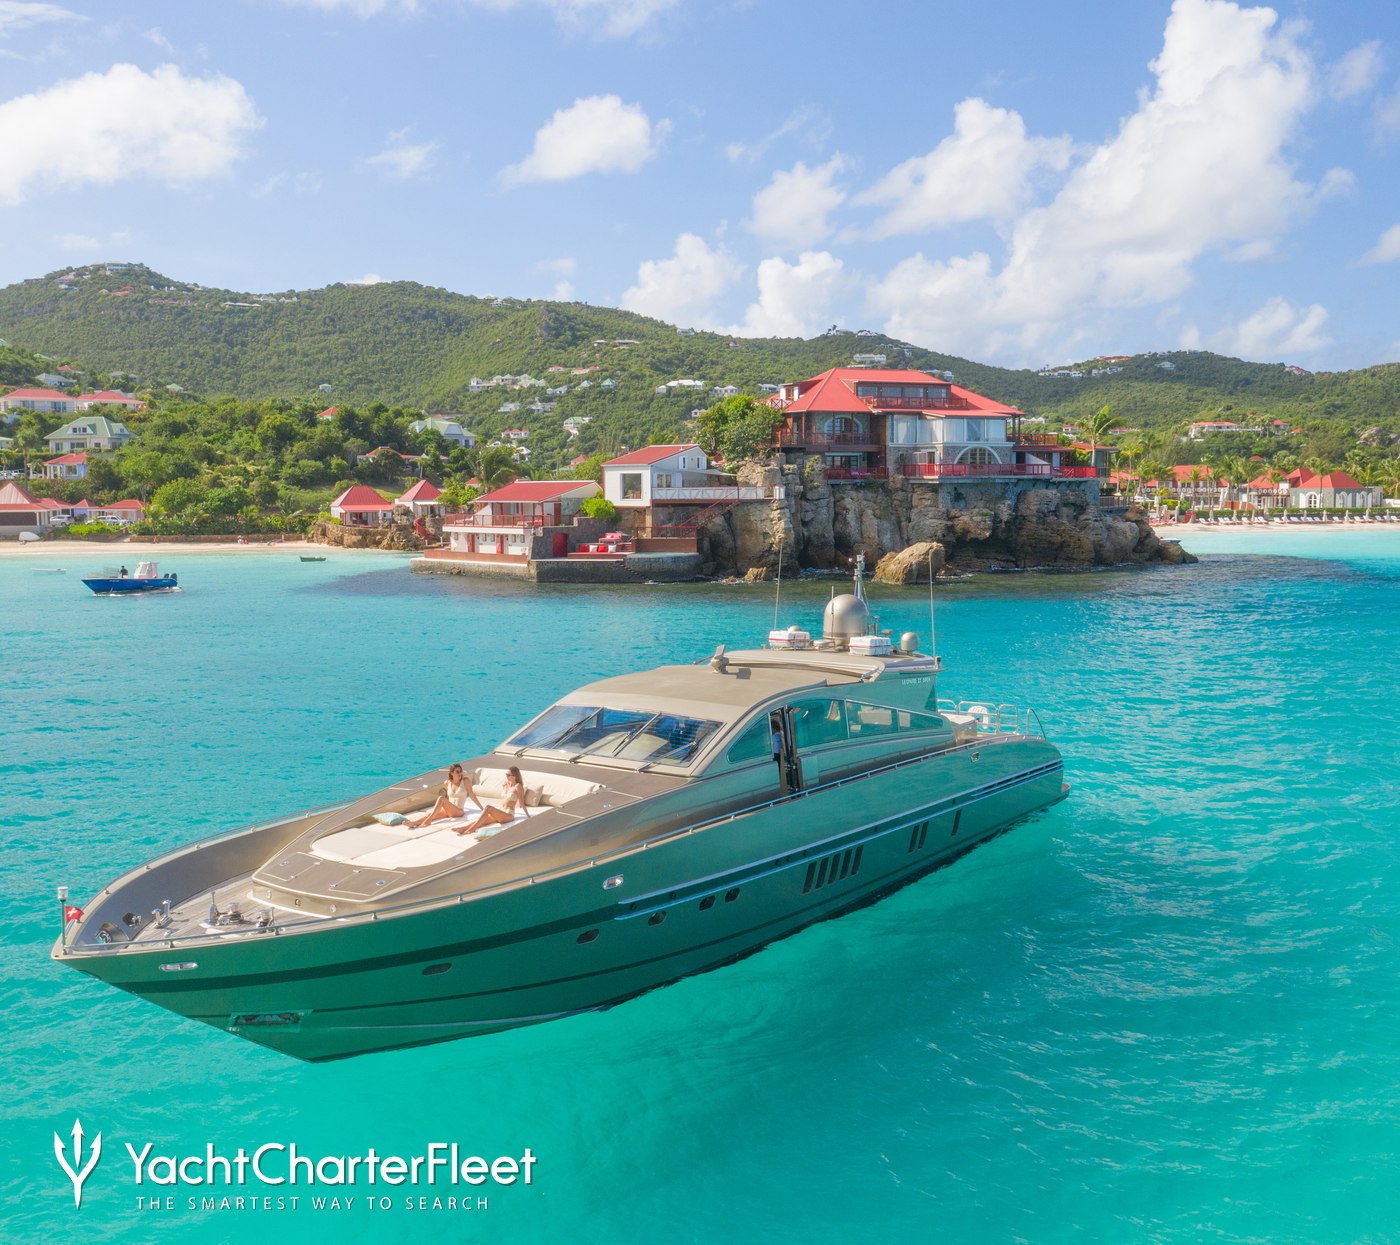 Eden Rock - St Barths Review: What To REALLY Expect If You Stay